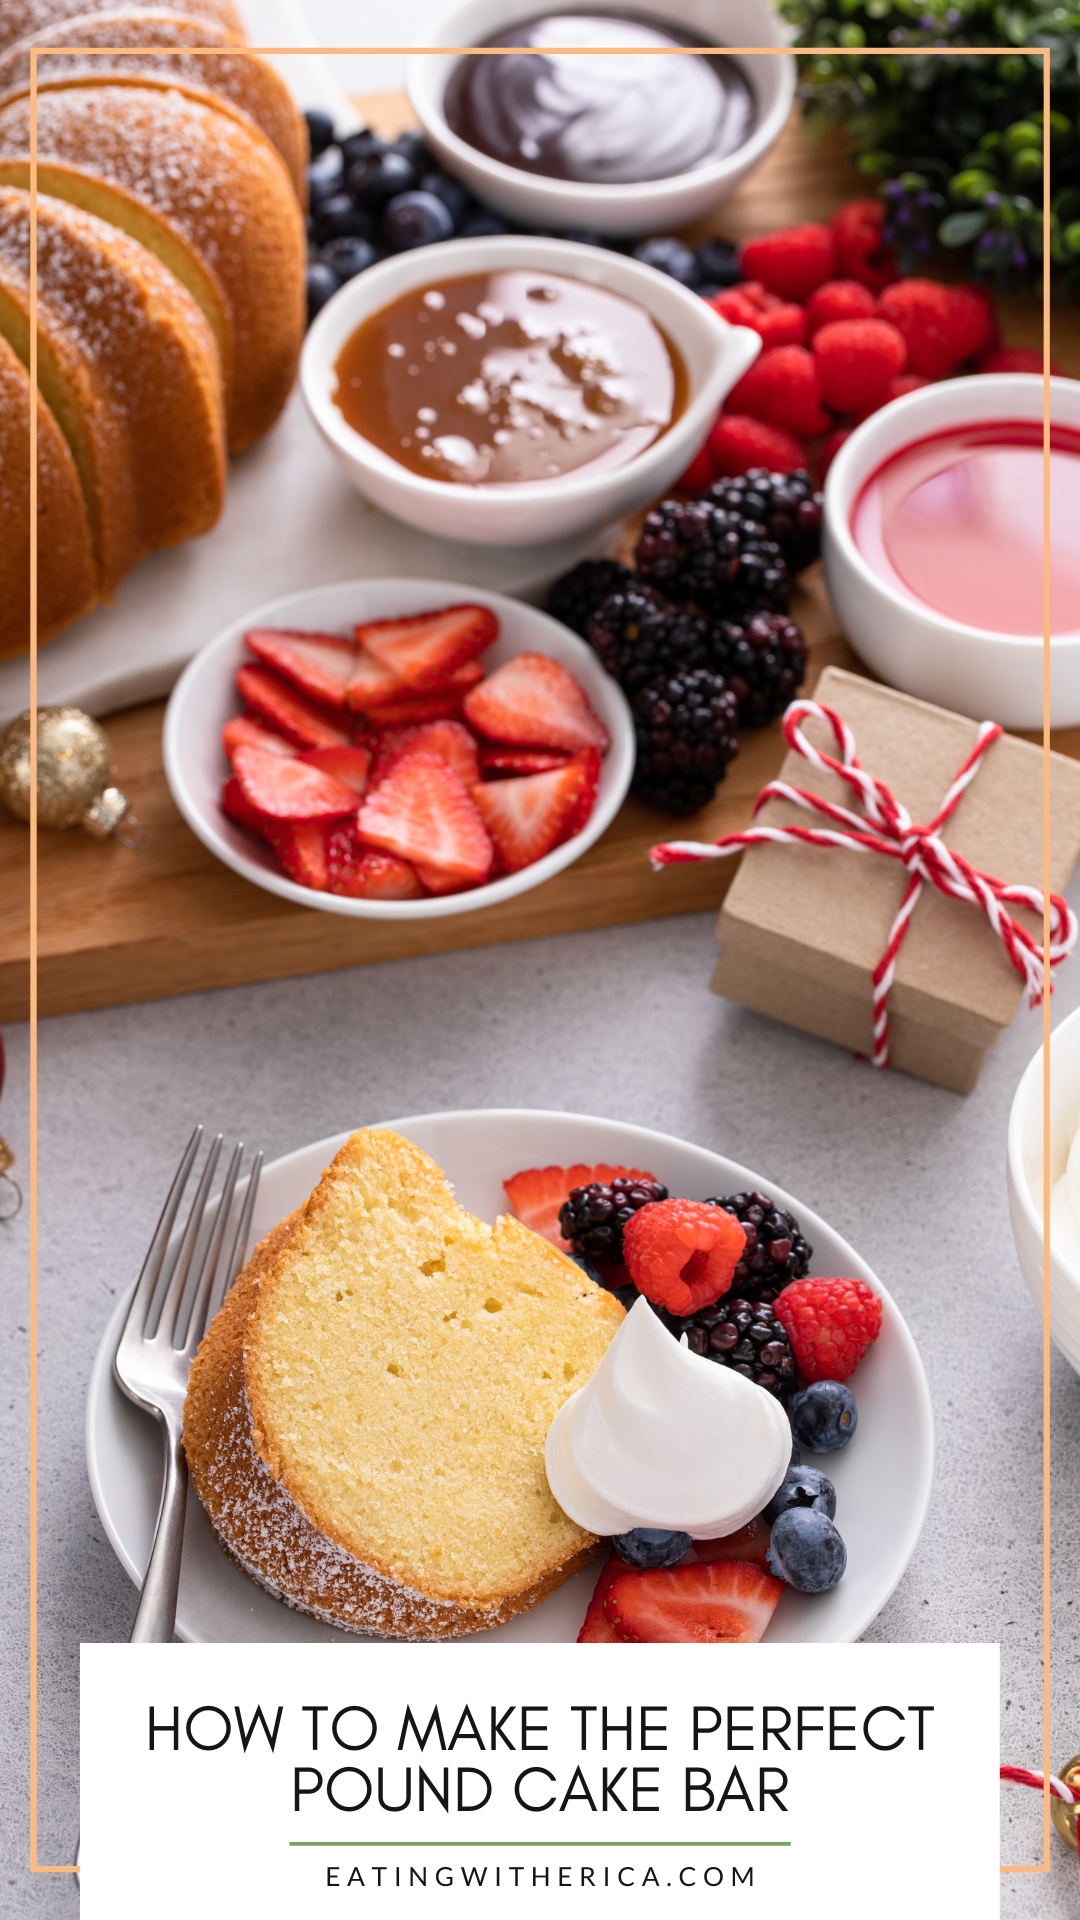 Looking for the perfect holiday gathering dessert? You need to try this Pound Cake bar this holiday season! Click HERE to make this delicious dessert and dessert bar!